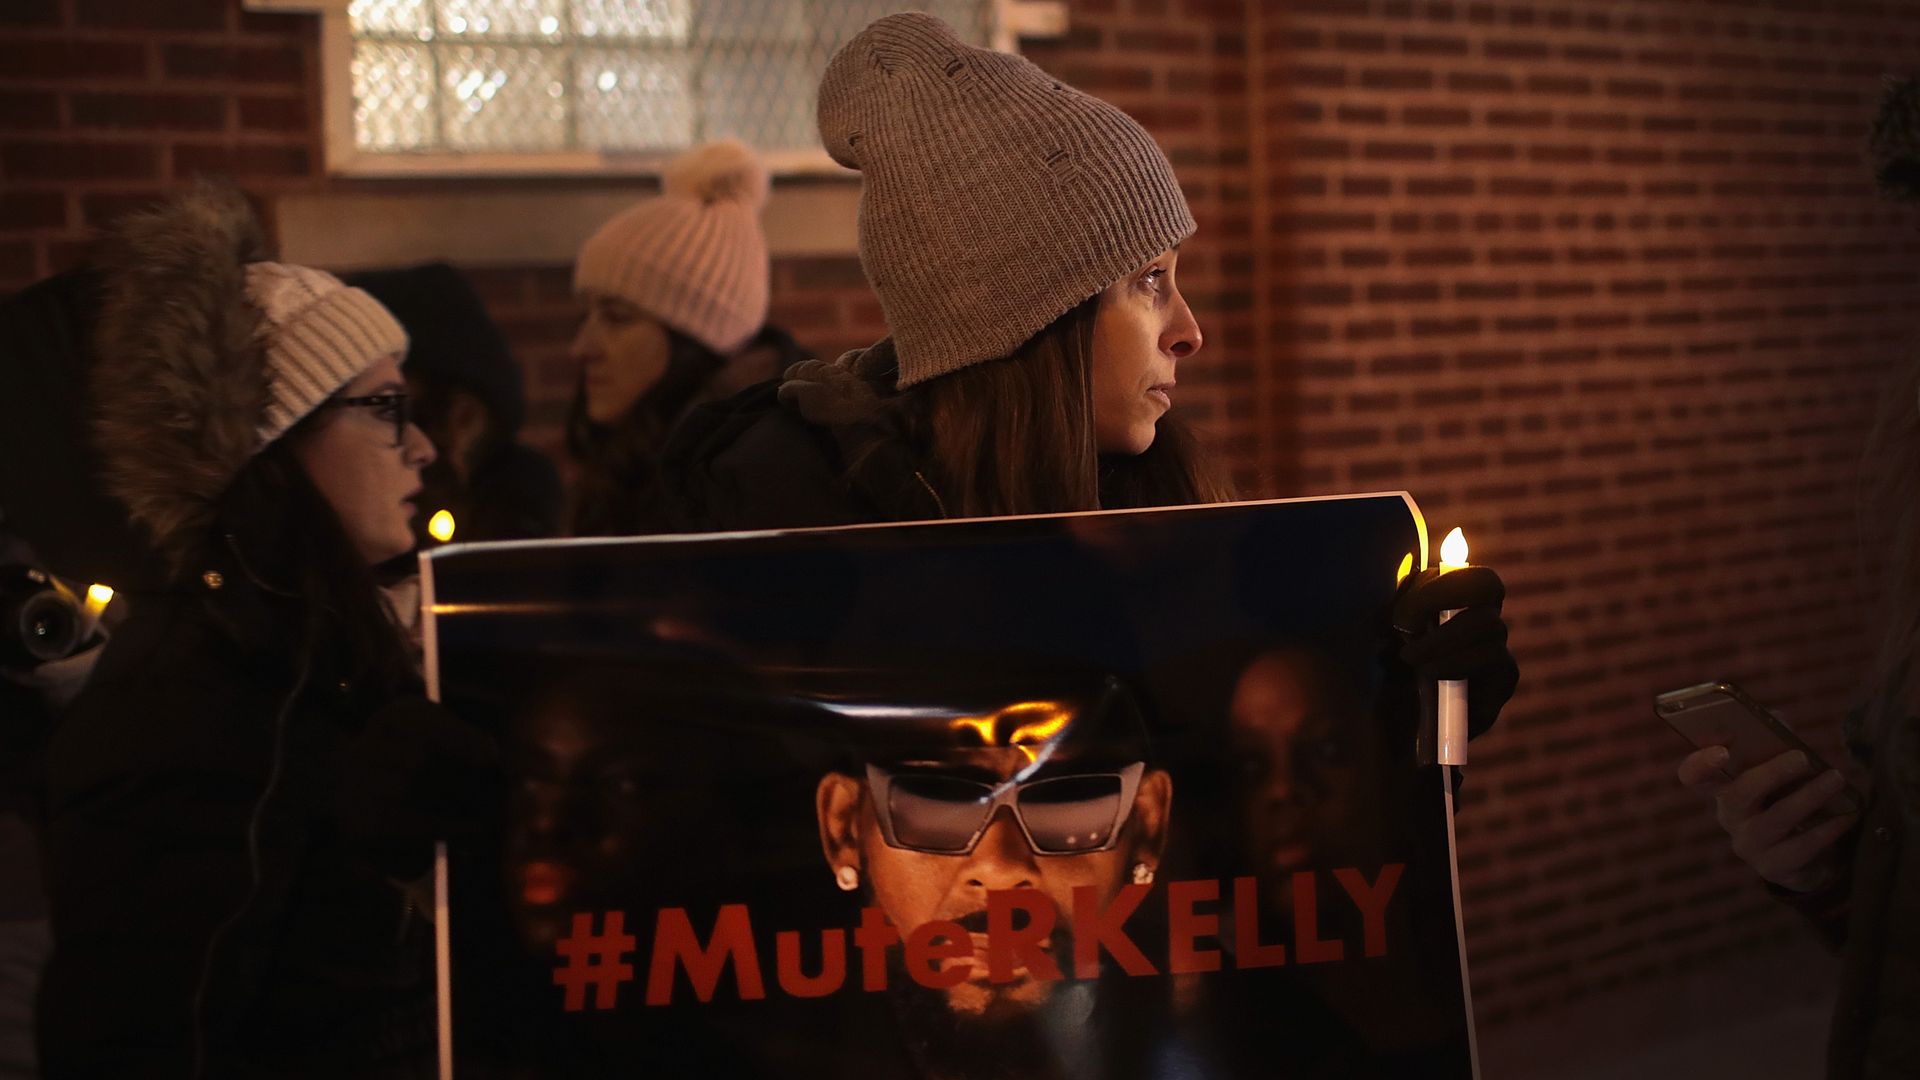 In this image, a woman in a winter coat and gloves holds a sign that says "Mute Kelly." The words on the sign are written in red over a picture of R. Kelly's face.